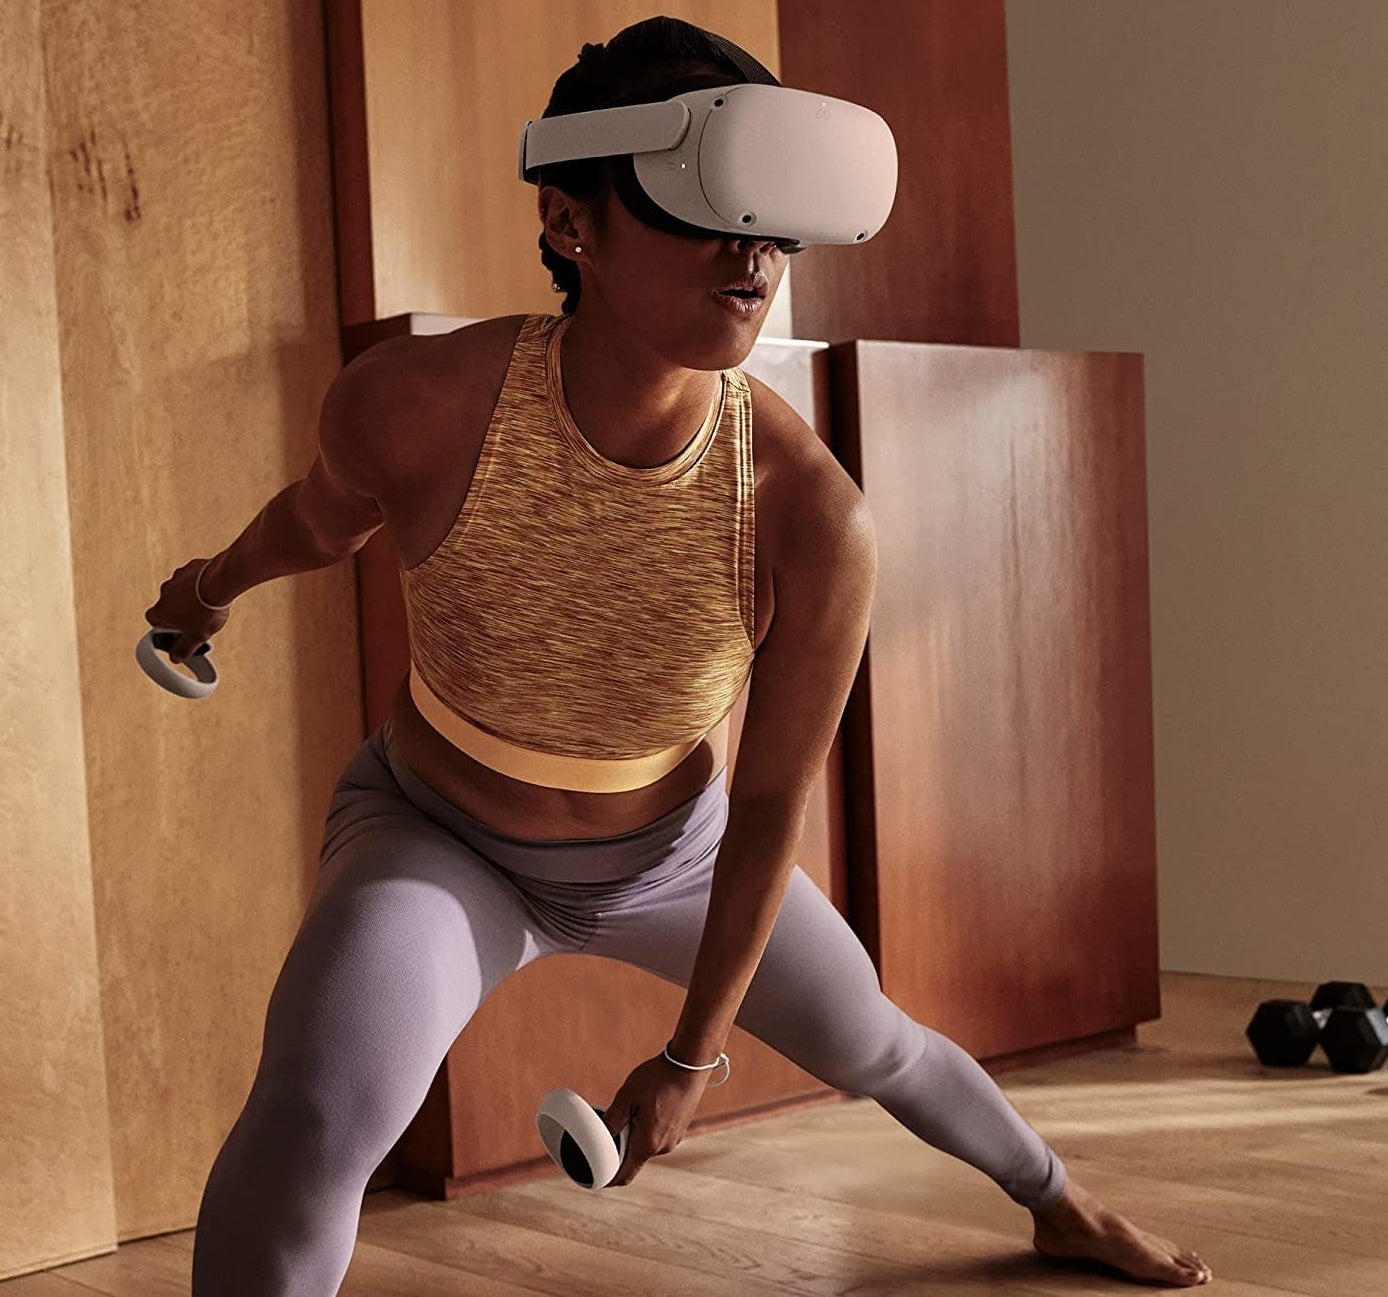 a model wearing the VR headset and holding a controller in each hand